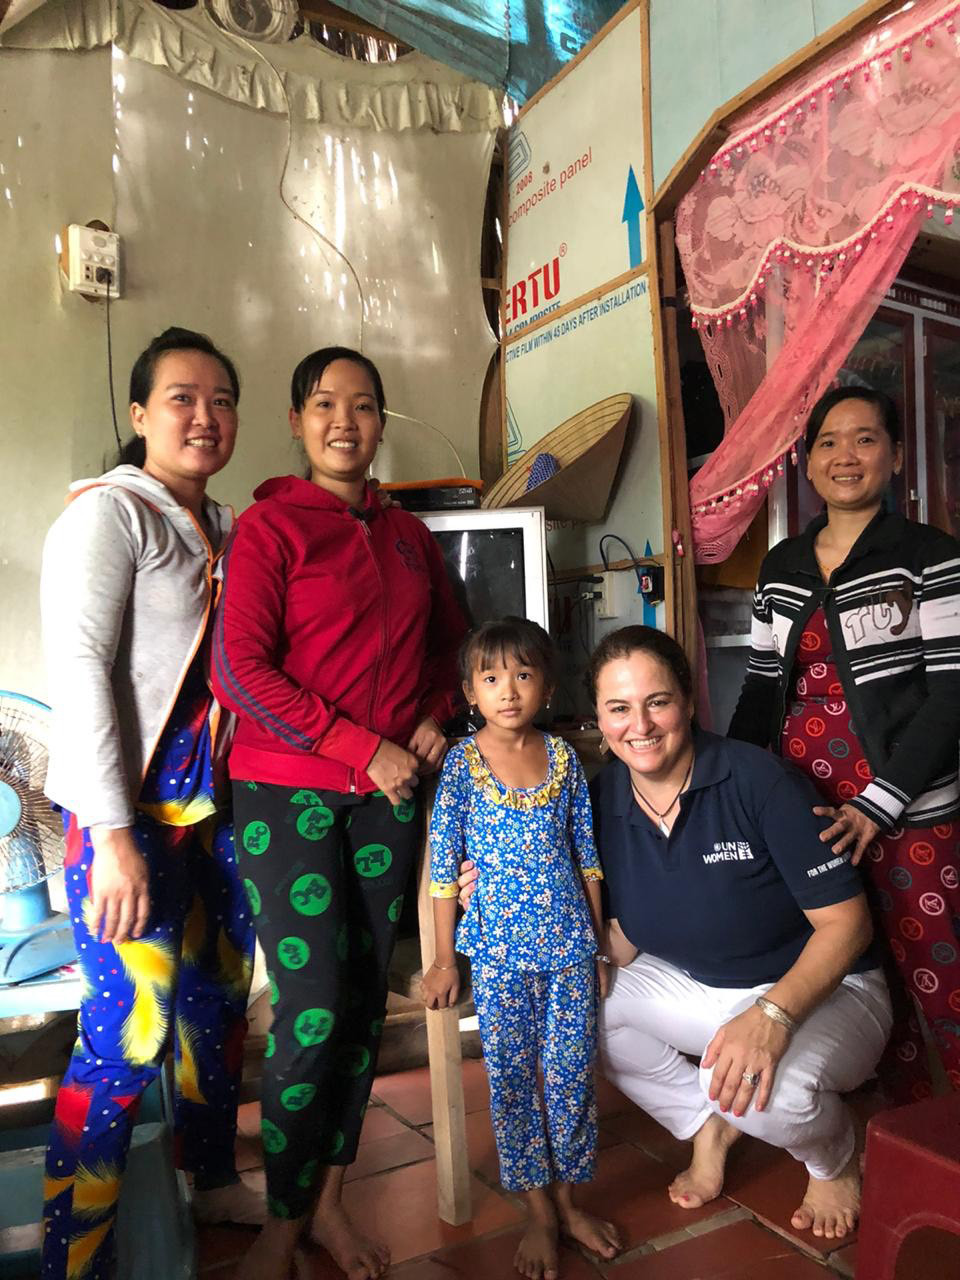 UN Women Representative in Viet Nam Elisa Fernandez Saenz (front right) visits the home of grant recipient Nguyen Qunyh Chi (second from left) in Tran Van Thoi district on 14 October and hugs her daughter, Joining them are Nguyen’s sisters. Photo: Tran Thi Thuy Anh